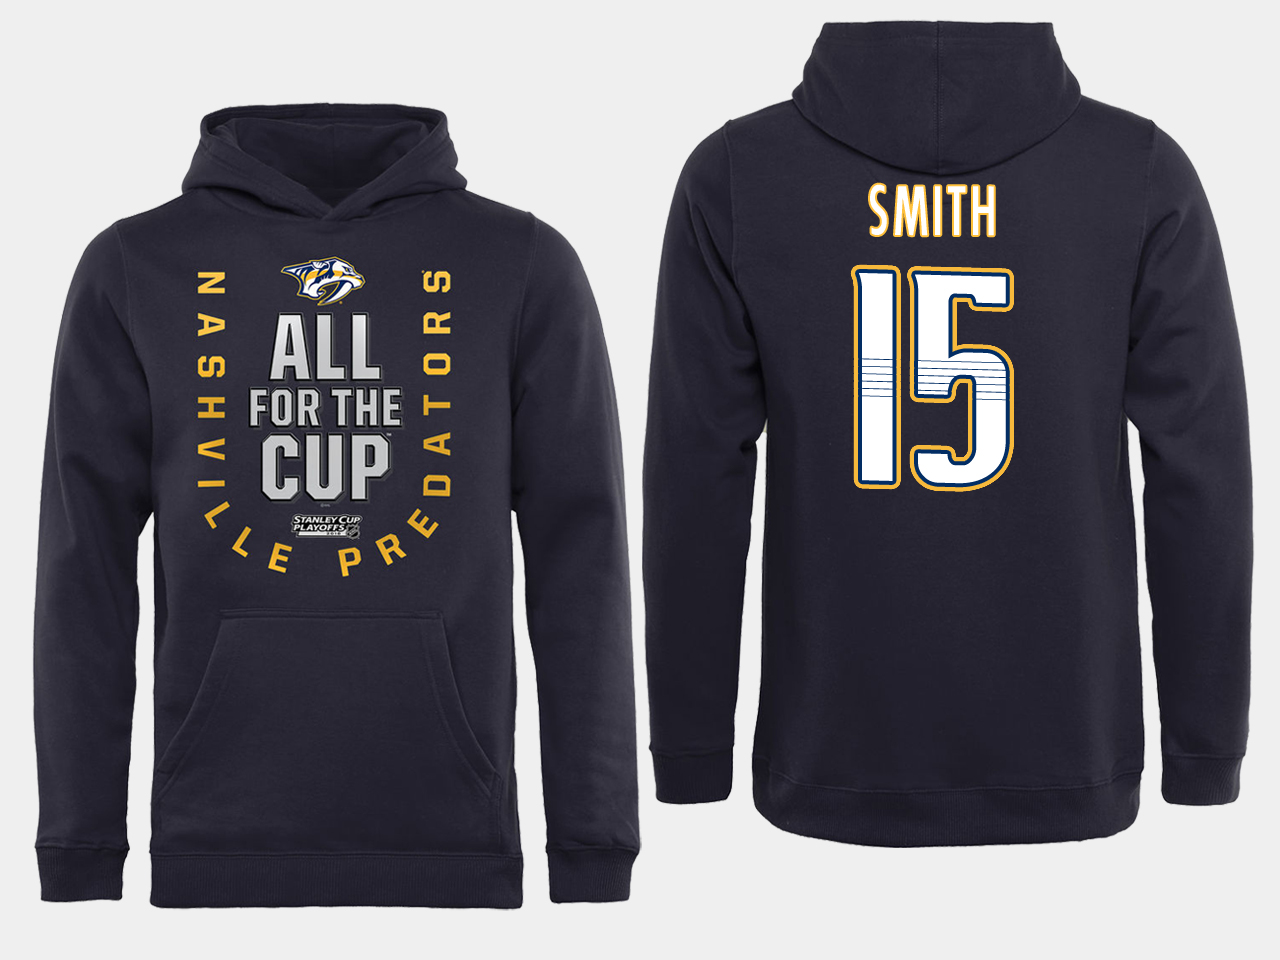 Men NHL Adidas Nashville Predators #16 Smith black ALL for the Cup hoodie->youth mlb jersey->Youth Jersey